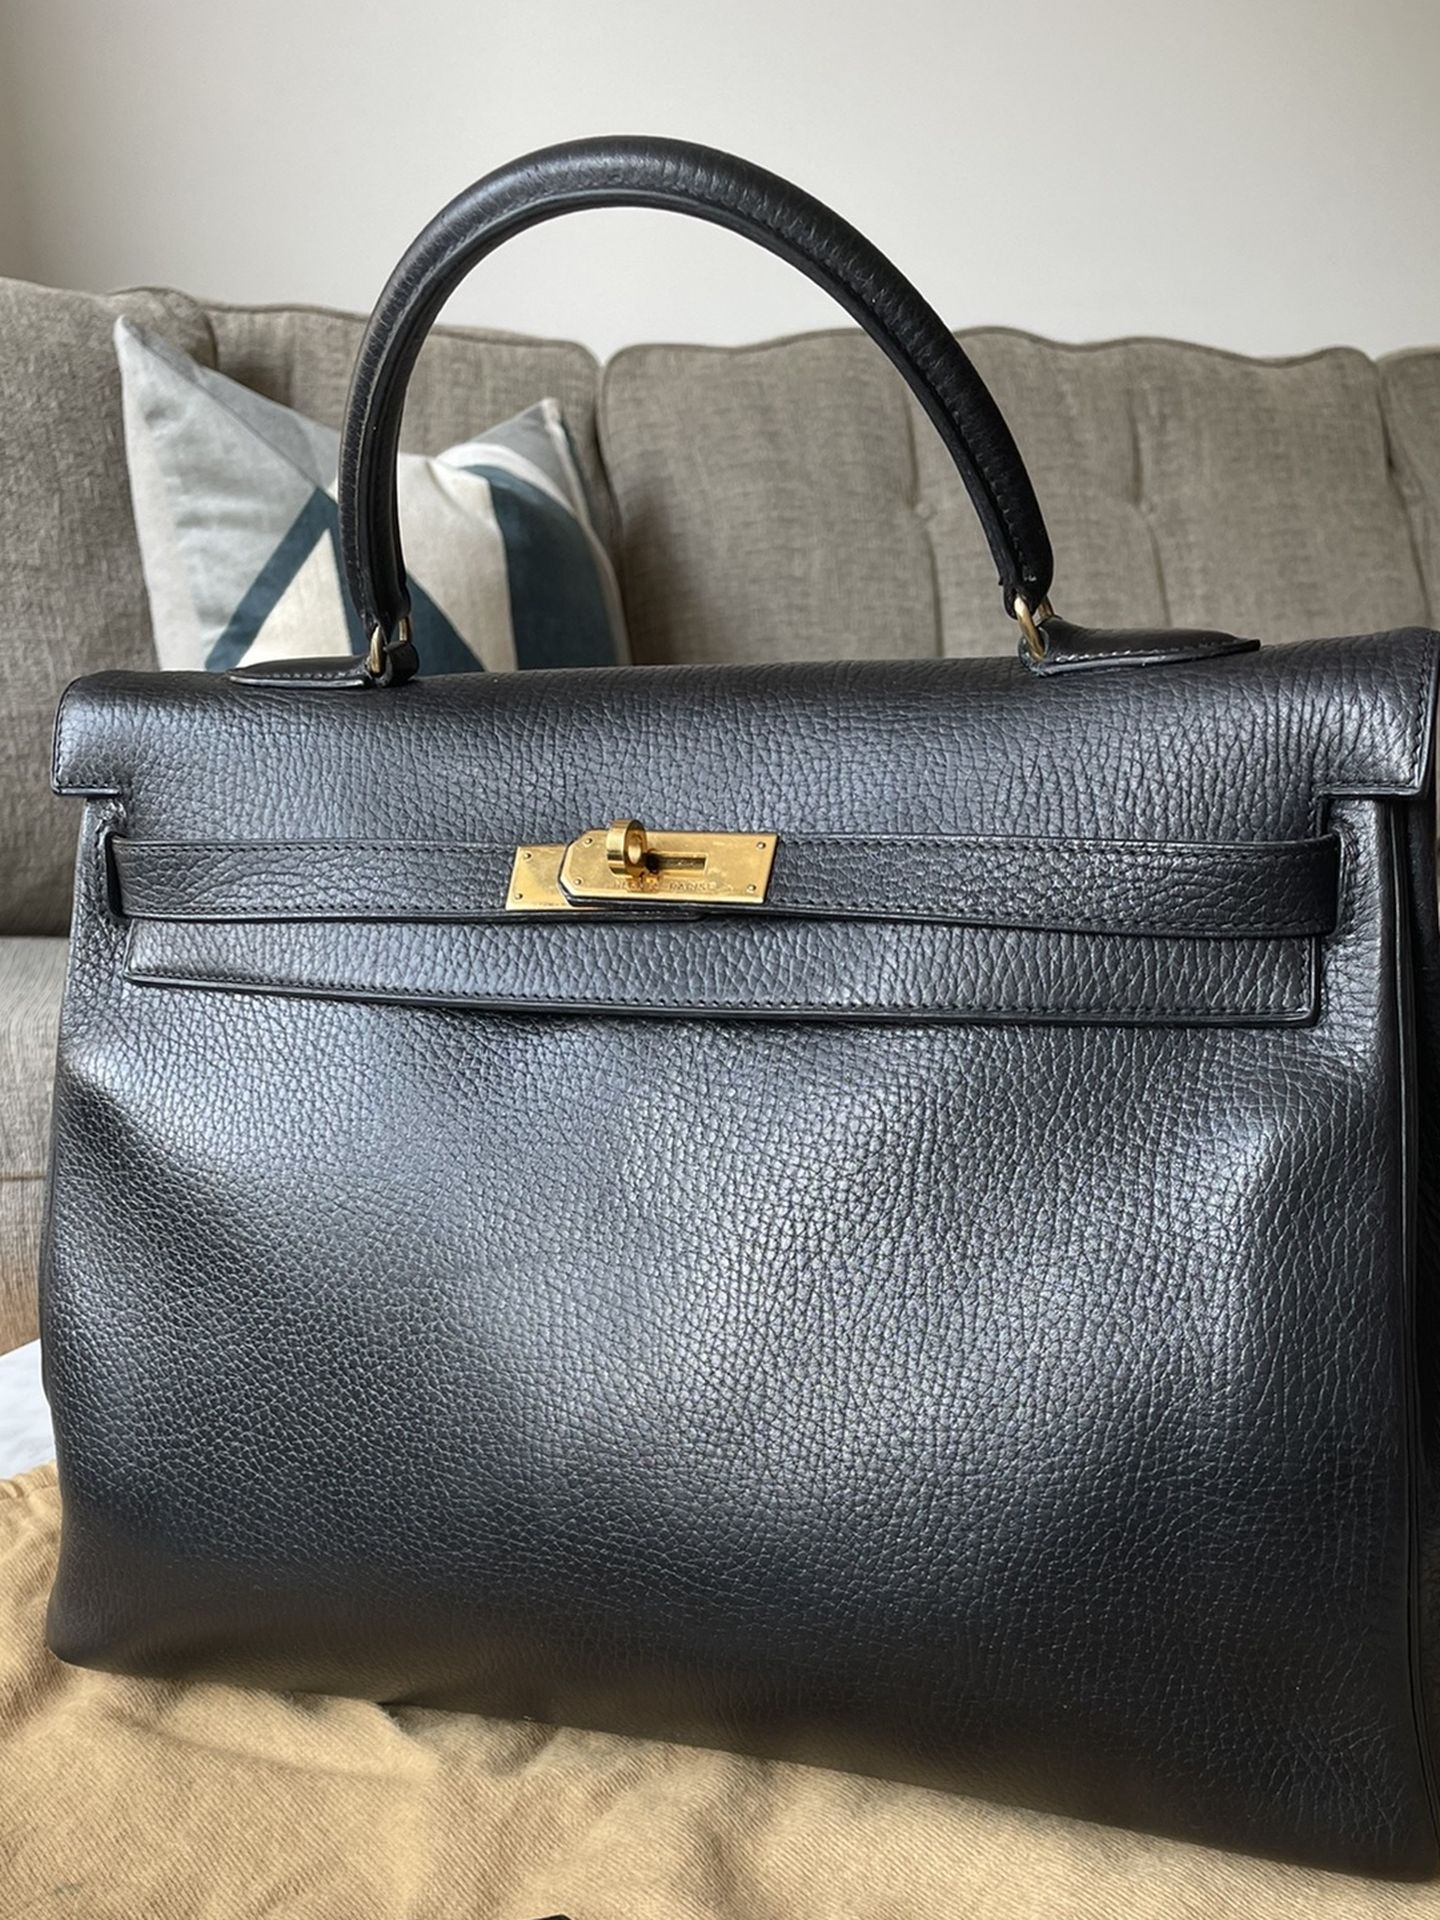 Hermes Kelly 35cm/14inches